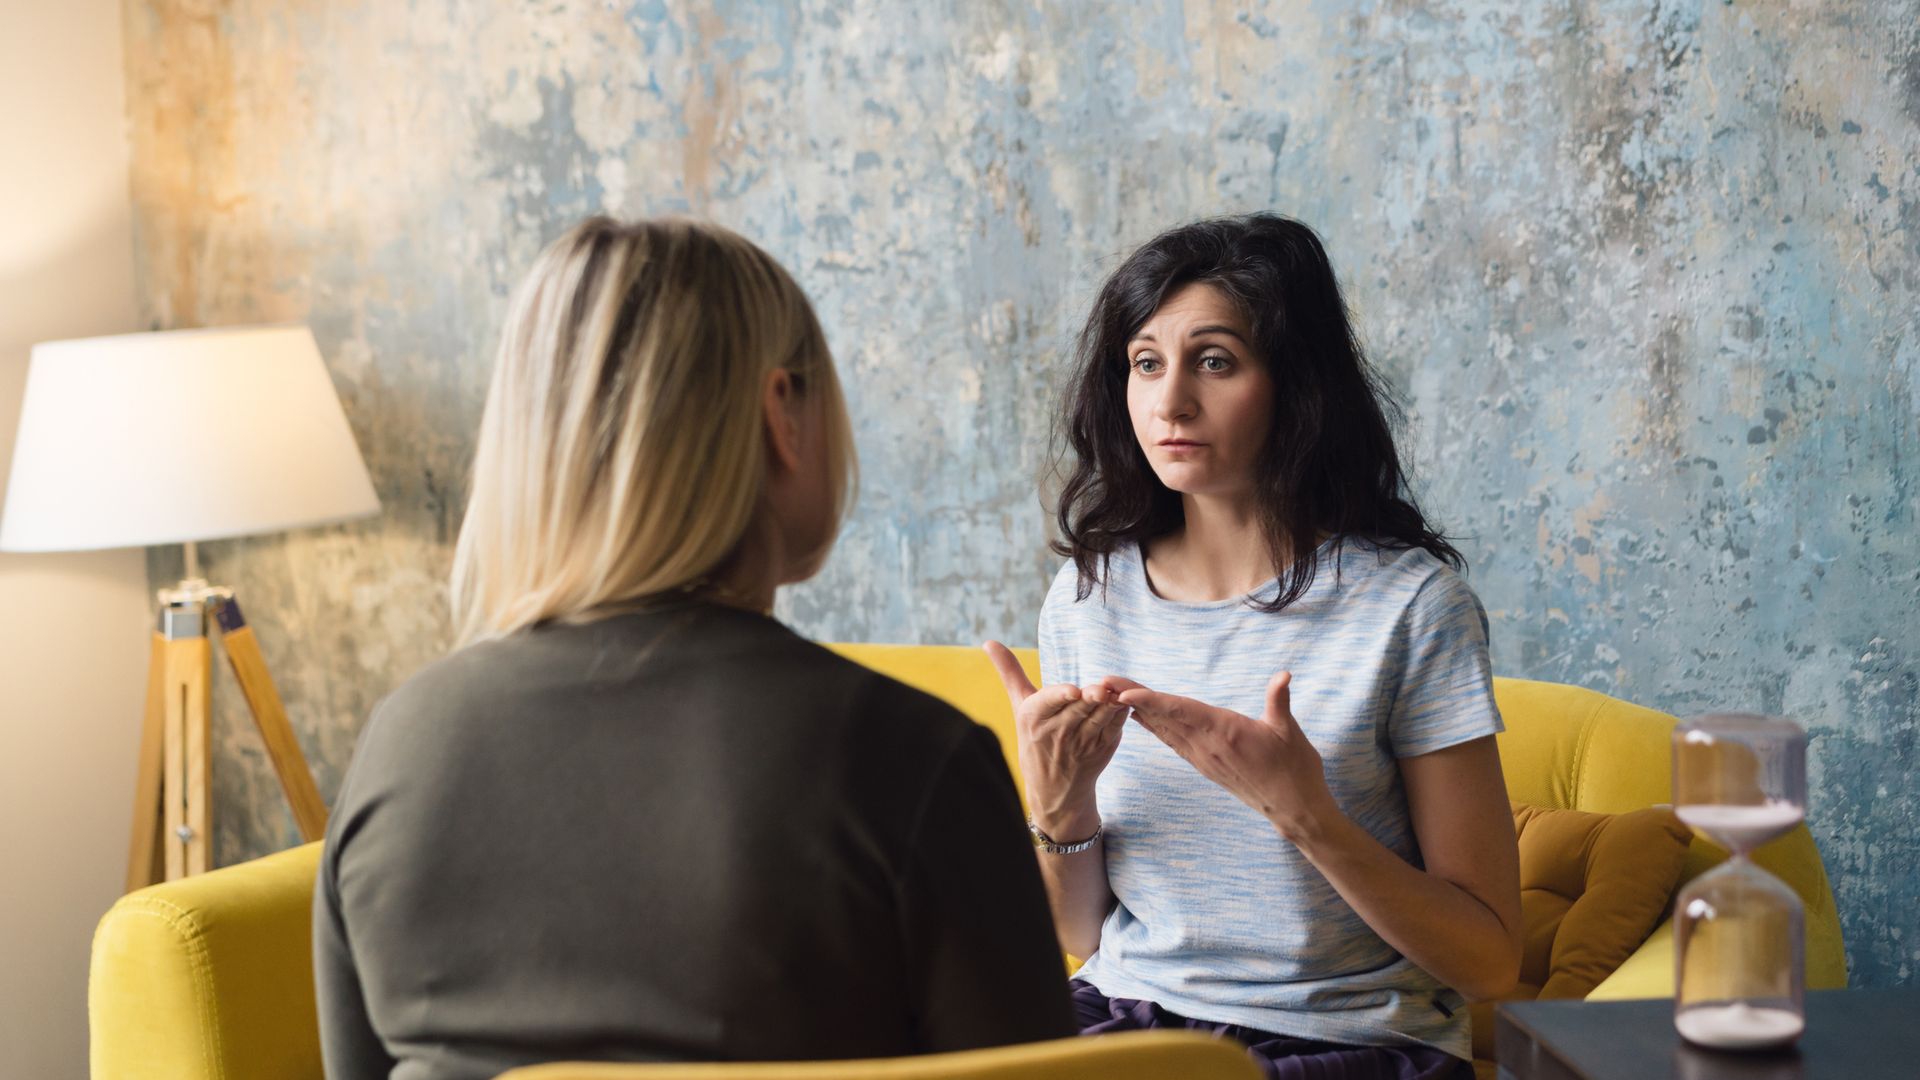 Woman psychologist talking to patient - stock photo 	Fiordaliso